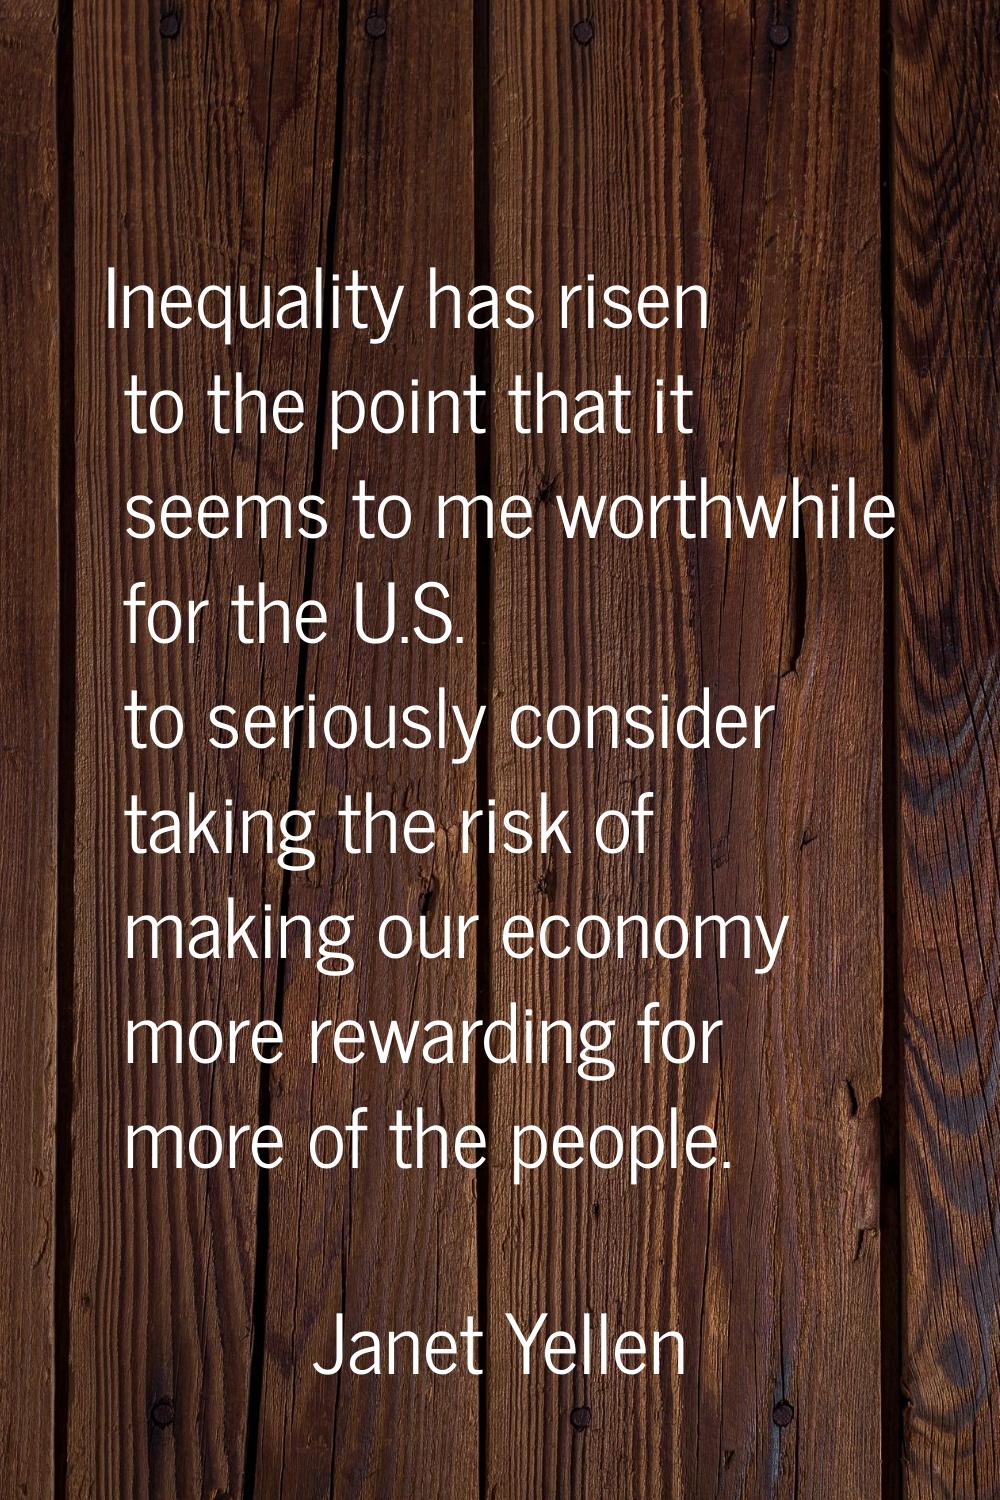 Inequality has risen to the point that it seems to me worthwhile for the U.S. to seriously consider